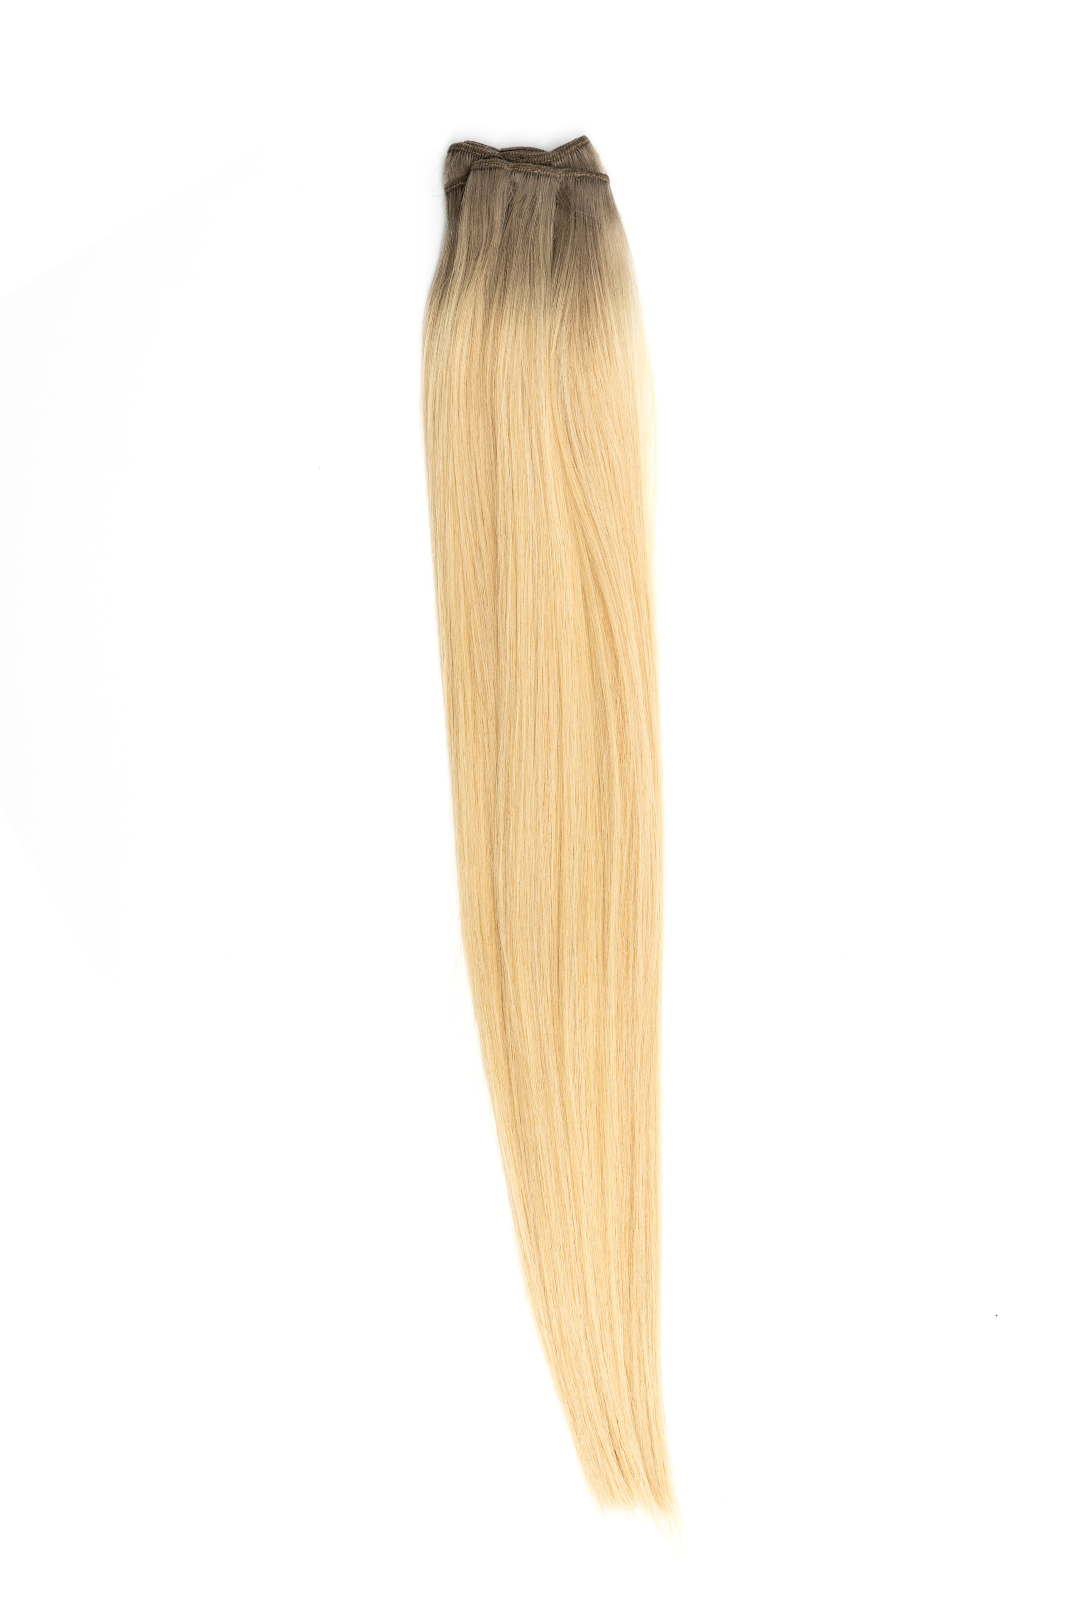 Laced Hair Keratin Bond Extensions Rooted #8/D16/22 (Rooted Buttercream)